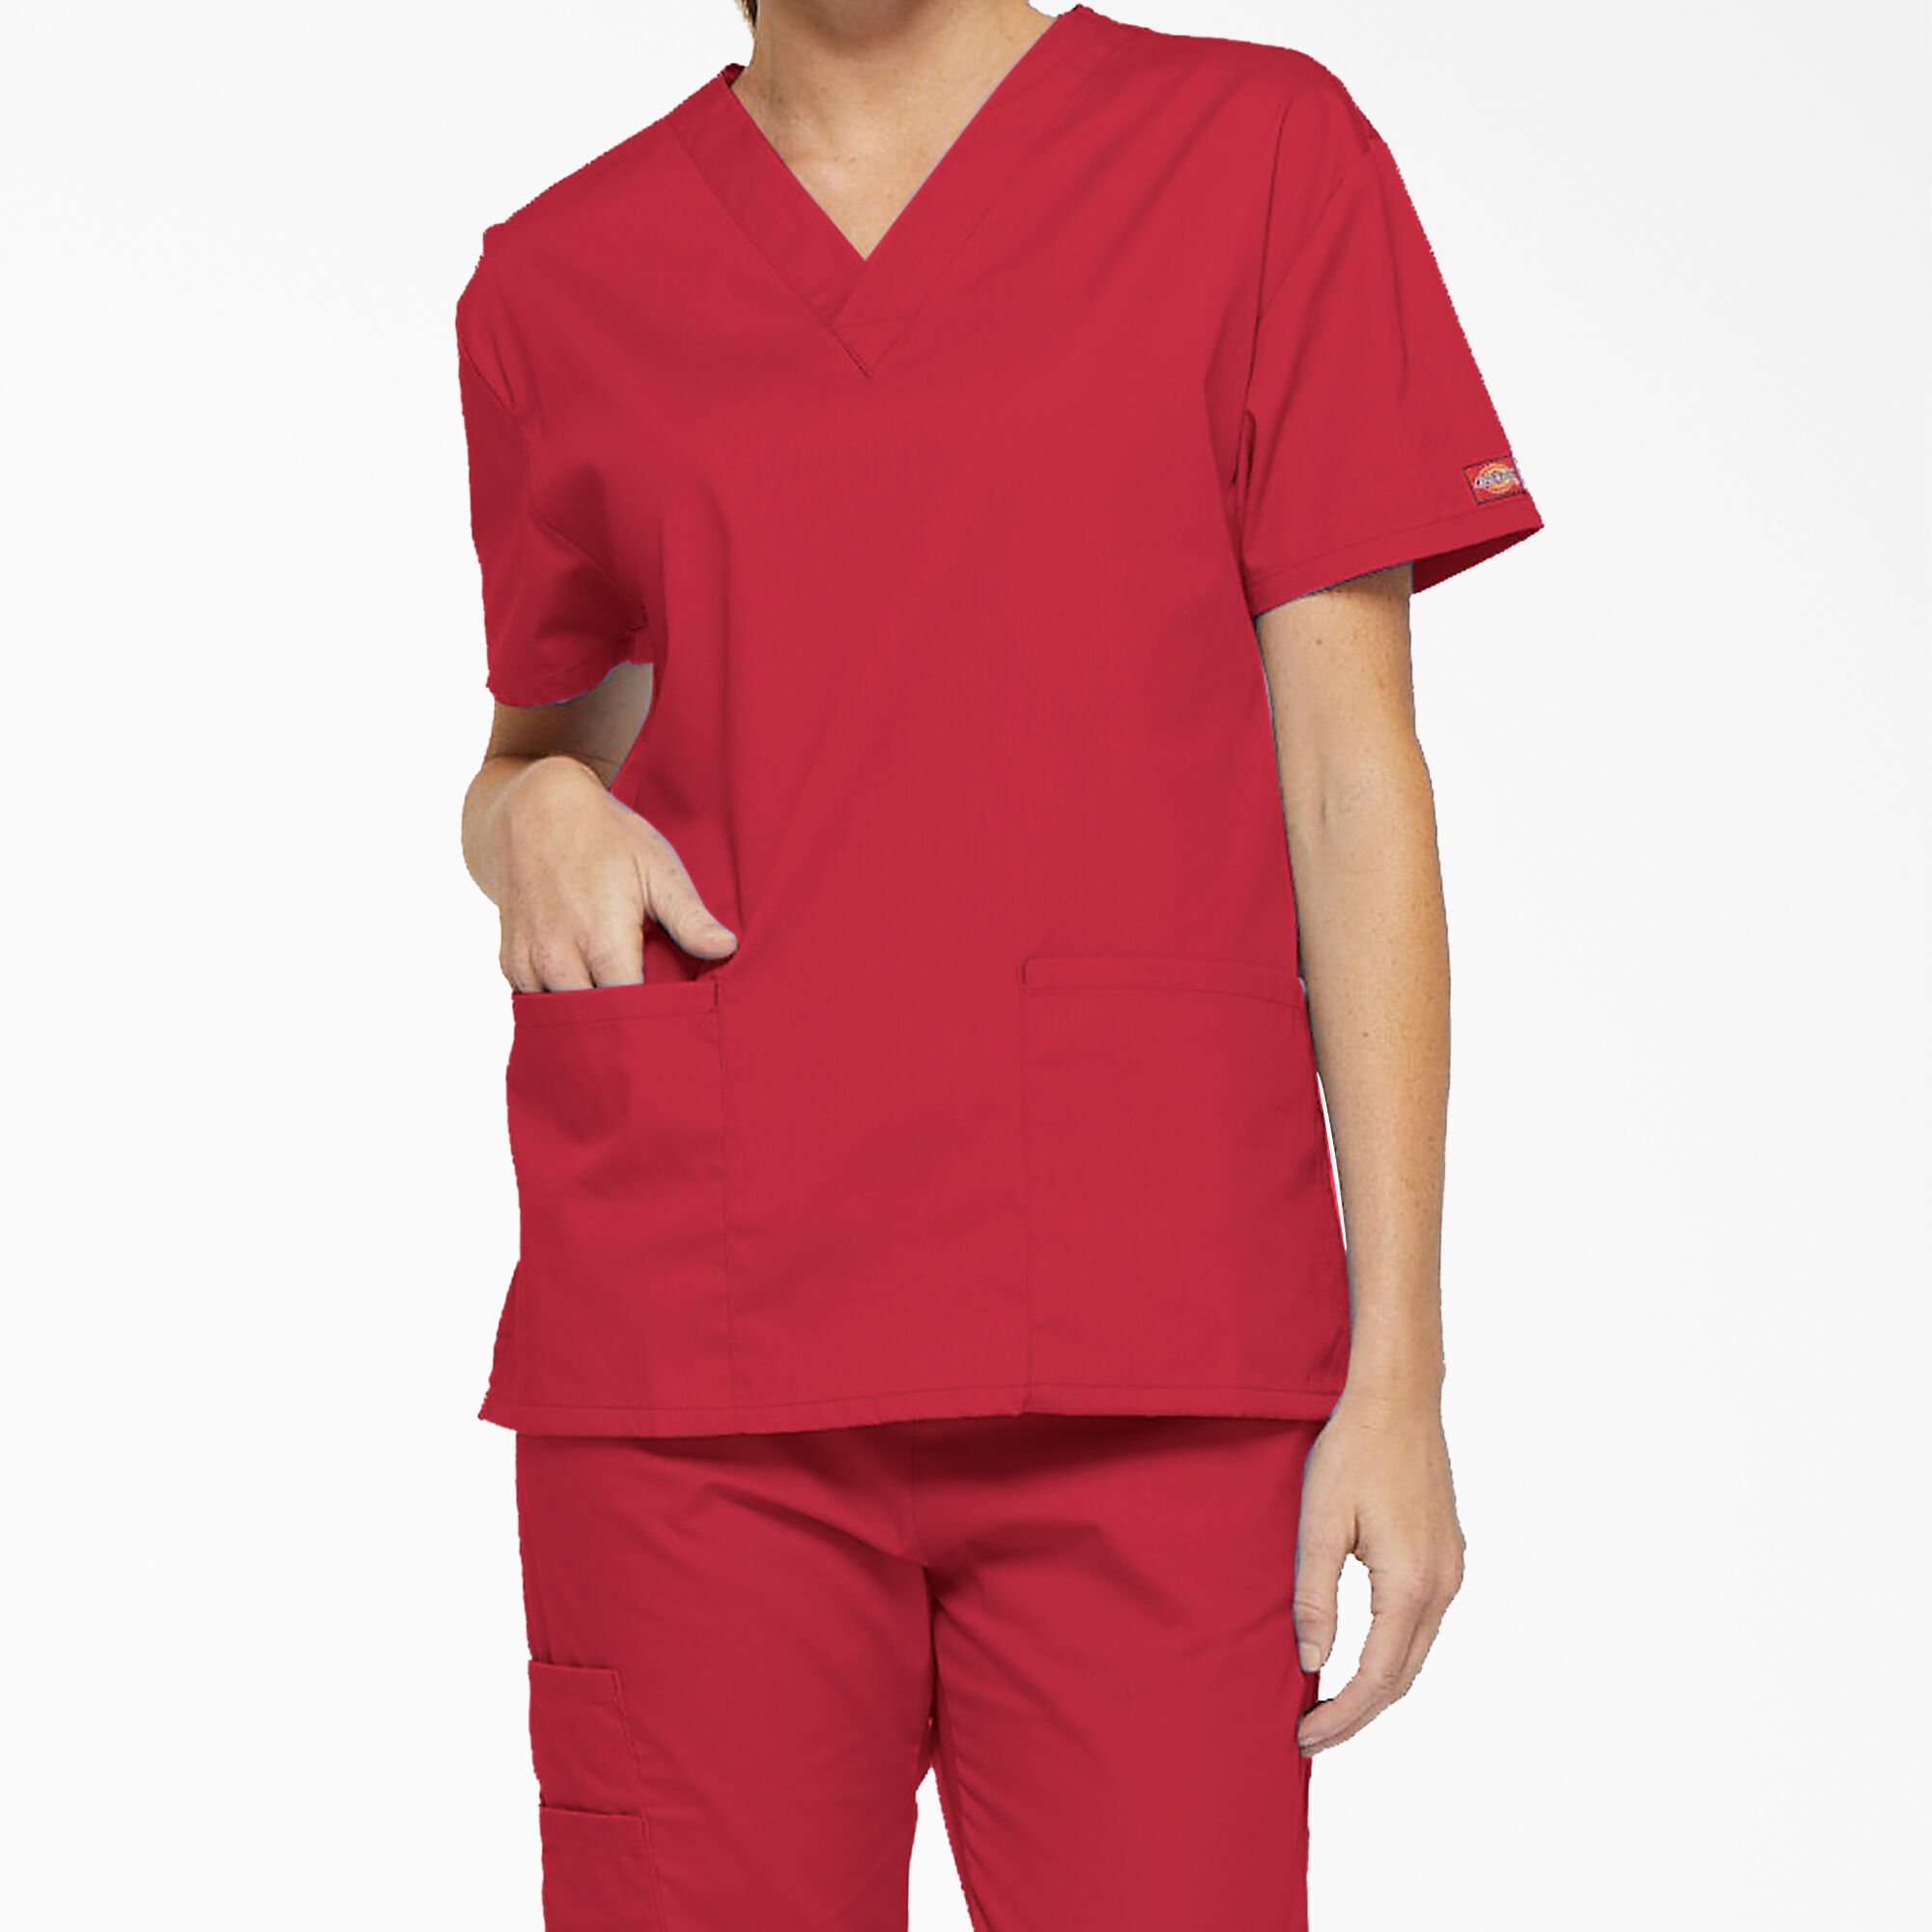 Top Style 86706 Pant Style 86106 DICKIES Scrub Sets Women EDS All Colors 